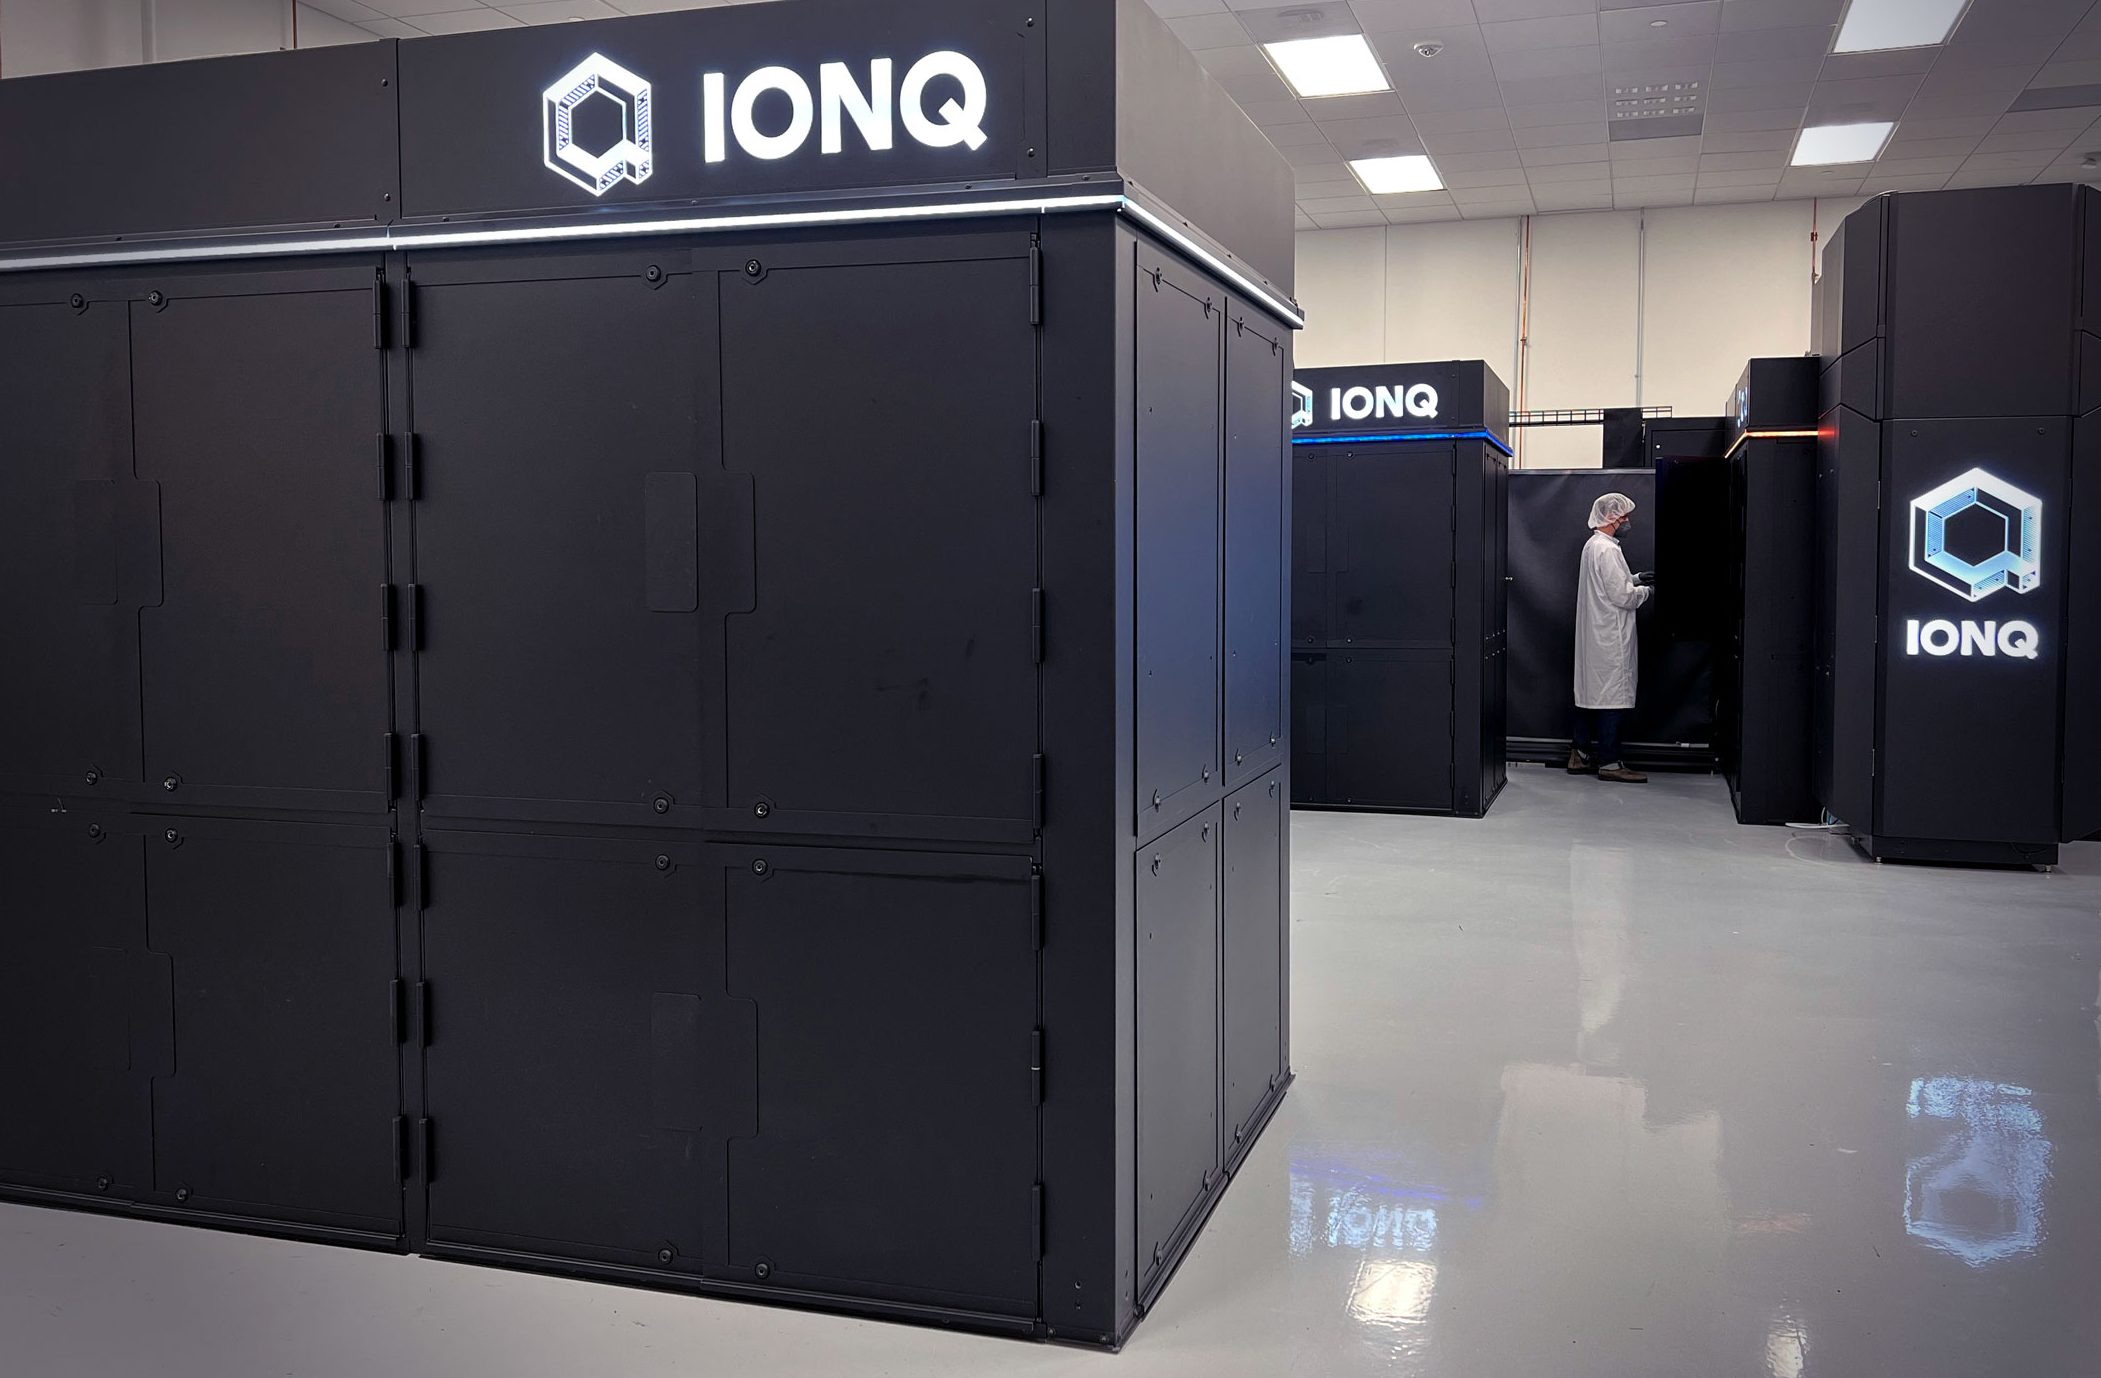 Quantum Computing Company Ionq Has Partnered With European Management And Technology Consulting Firm Bearingpoint To Offer Quantum System Access And Professional Services Across Europe. The Collaboration Will Allow Bearingpoint Consultants To Propose Solutions That Utilise Ionq'S Systems For Both Public And Private Groups. The Agreement Is Part Of Ionq'S Ongoing International Expansion, Which Includes A Recent Partnership With Quantumbasel To Establish A European Quantum Data Centre. Ionq'S Ceo, Peter Chapman, And Bearingpoint'S Global Leader Technology, Matthias Röser, Expressed Their Excitement About The Potential Applications Of Quantum Computing.